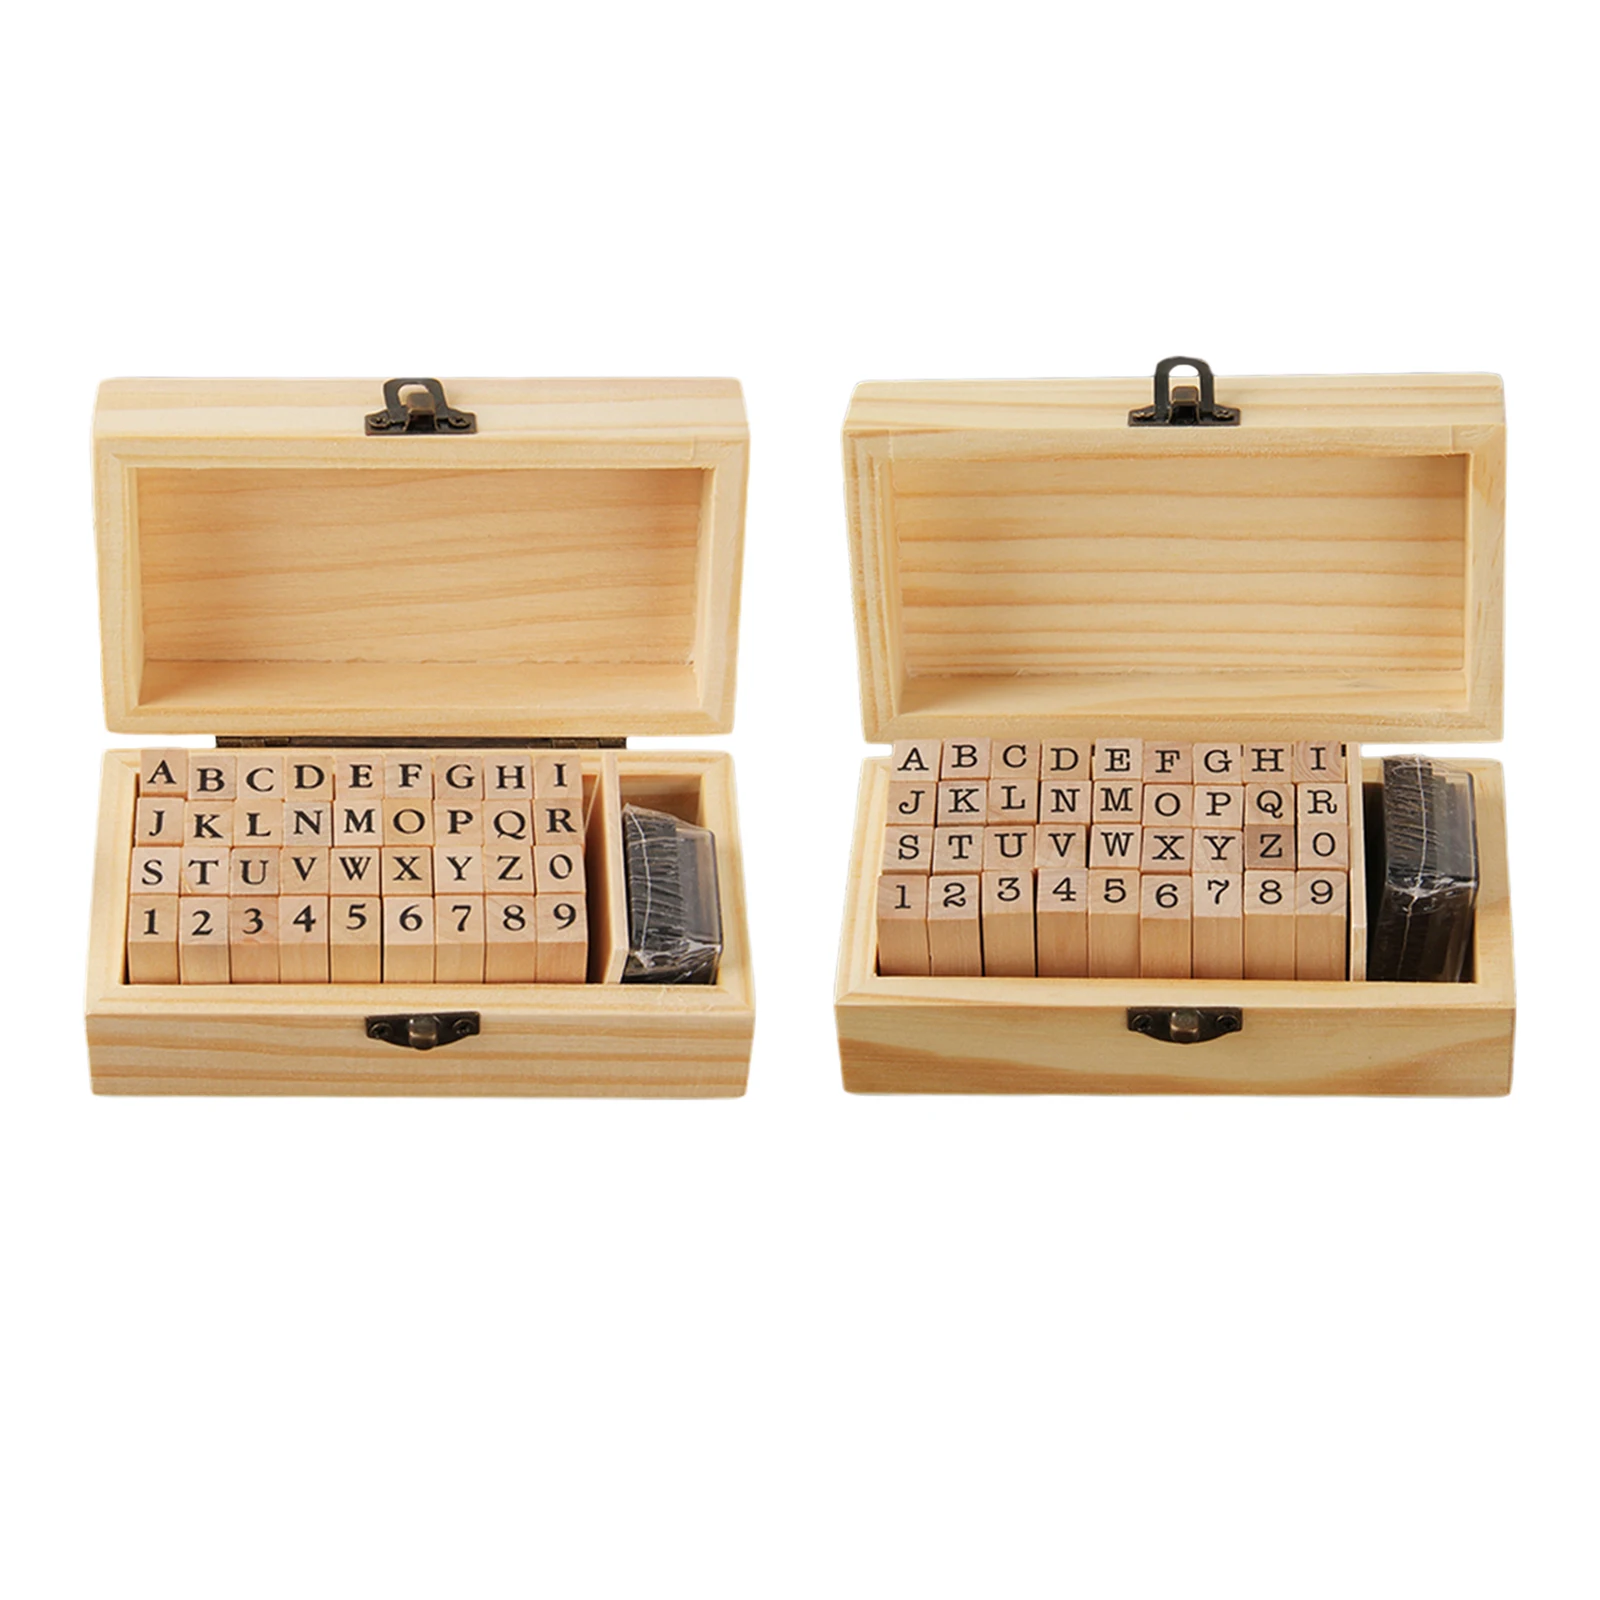 36pcs DIY Number Alphabet Letter Wood Rubber Stamps Set with Wooden Box for Kids Adults DIY Scrapbooking Card Making Stamping